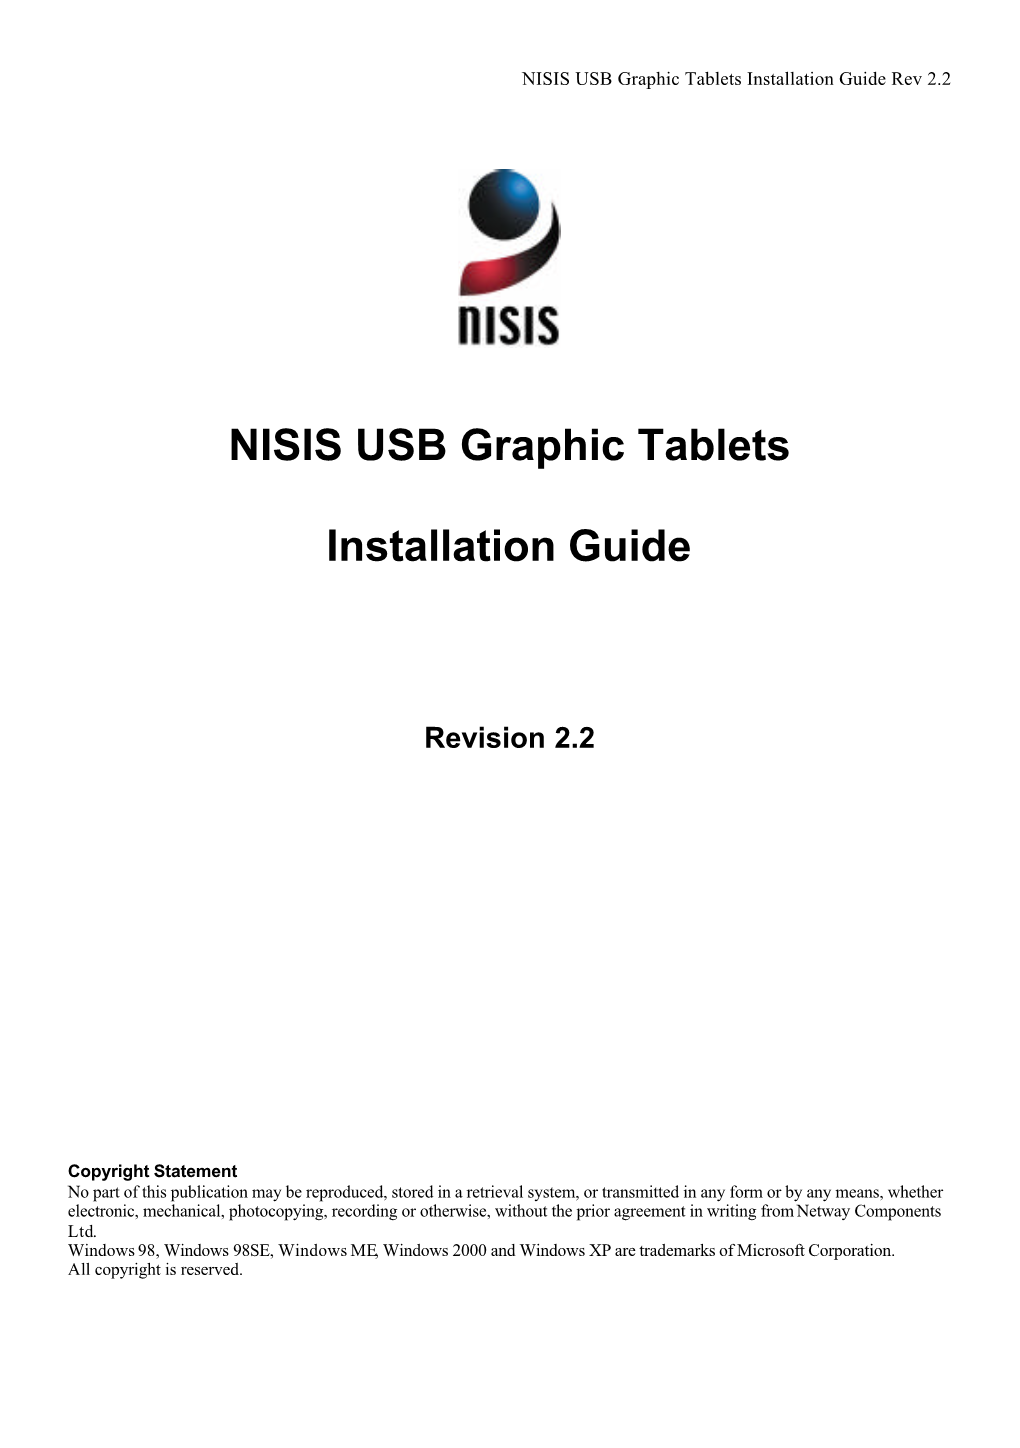 NISIS USB Graphic Tablets Installation Guide Rev 2.2